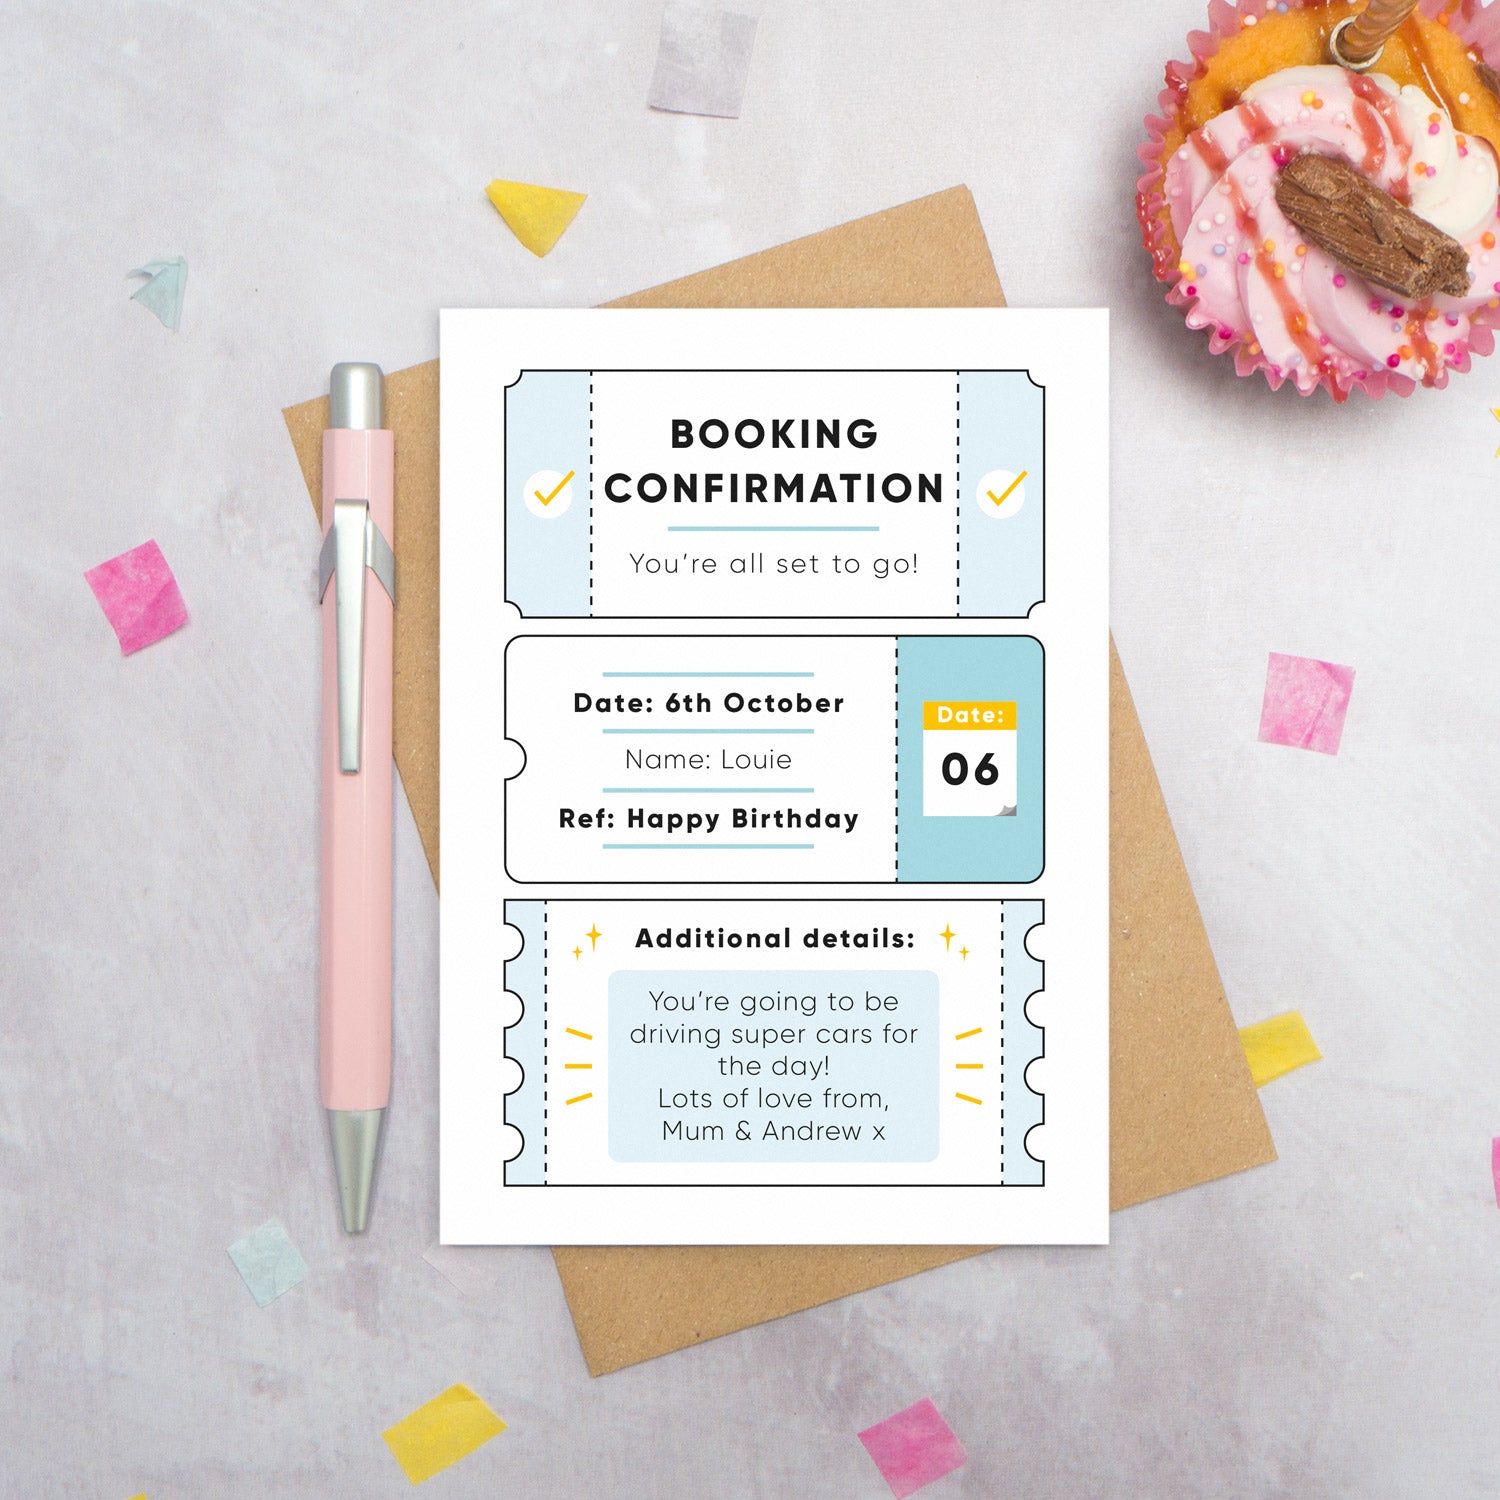 A personalised birthday booking confirmation gift card lying flat lay on a grey surface surrounded by confetti, a cupcake and a pink pen. The card is lying on it’s kraft brown envelope and pictured is the blue version of the gift card.